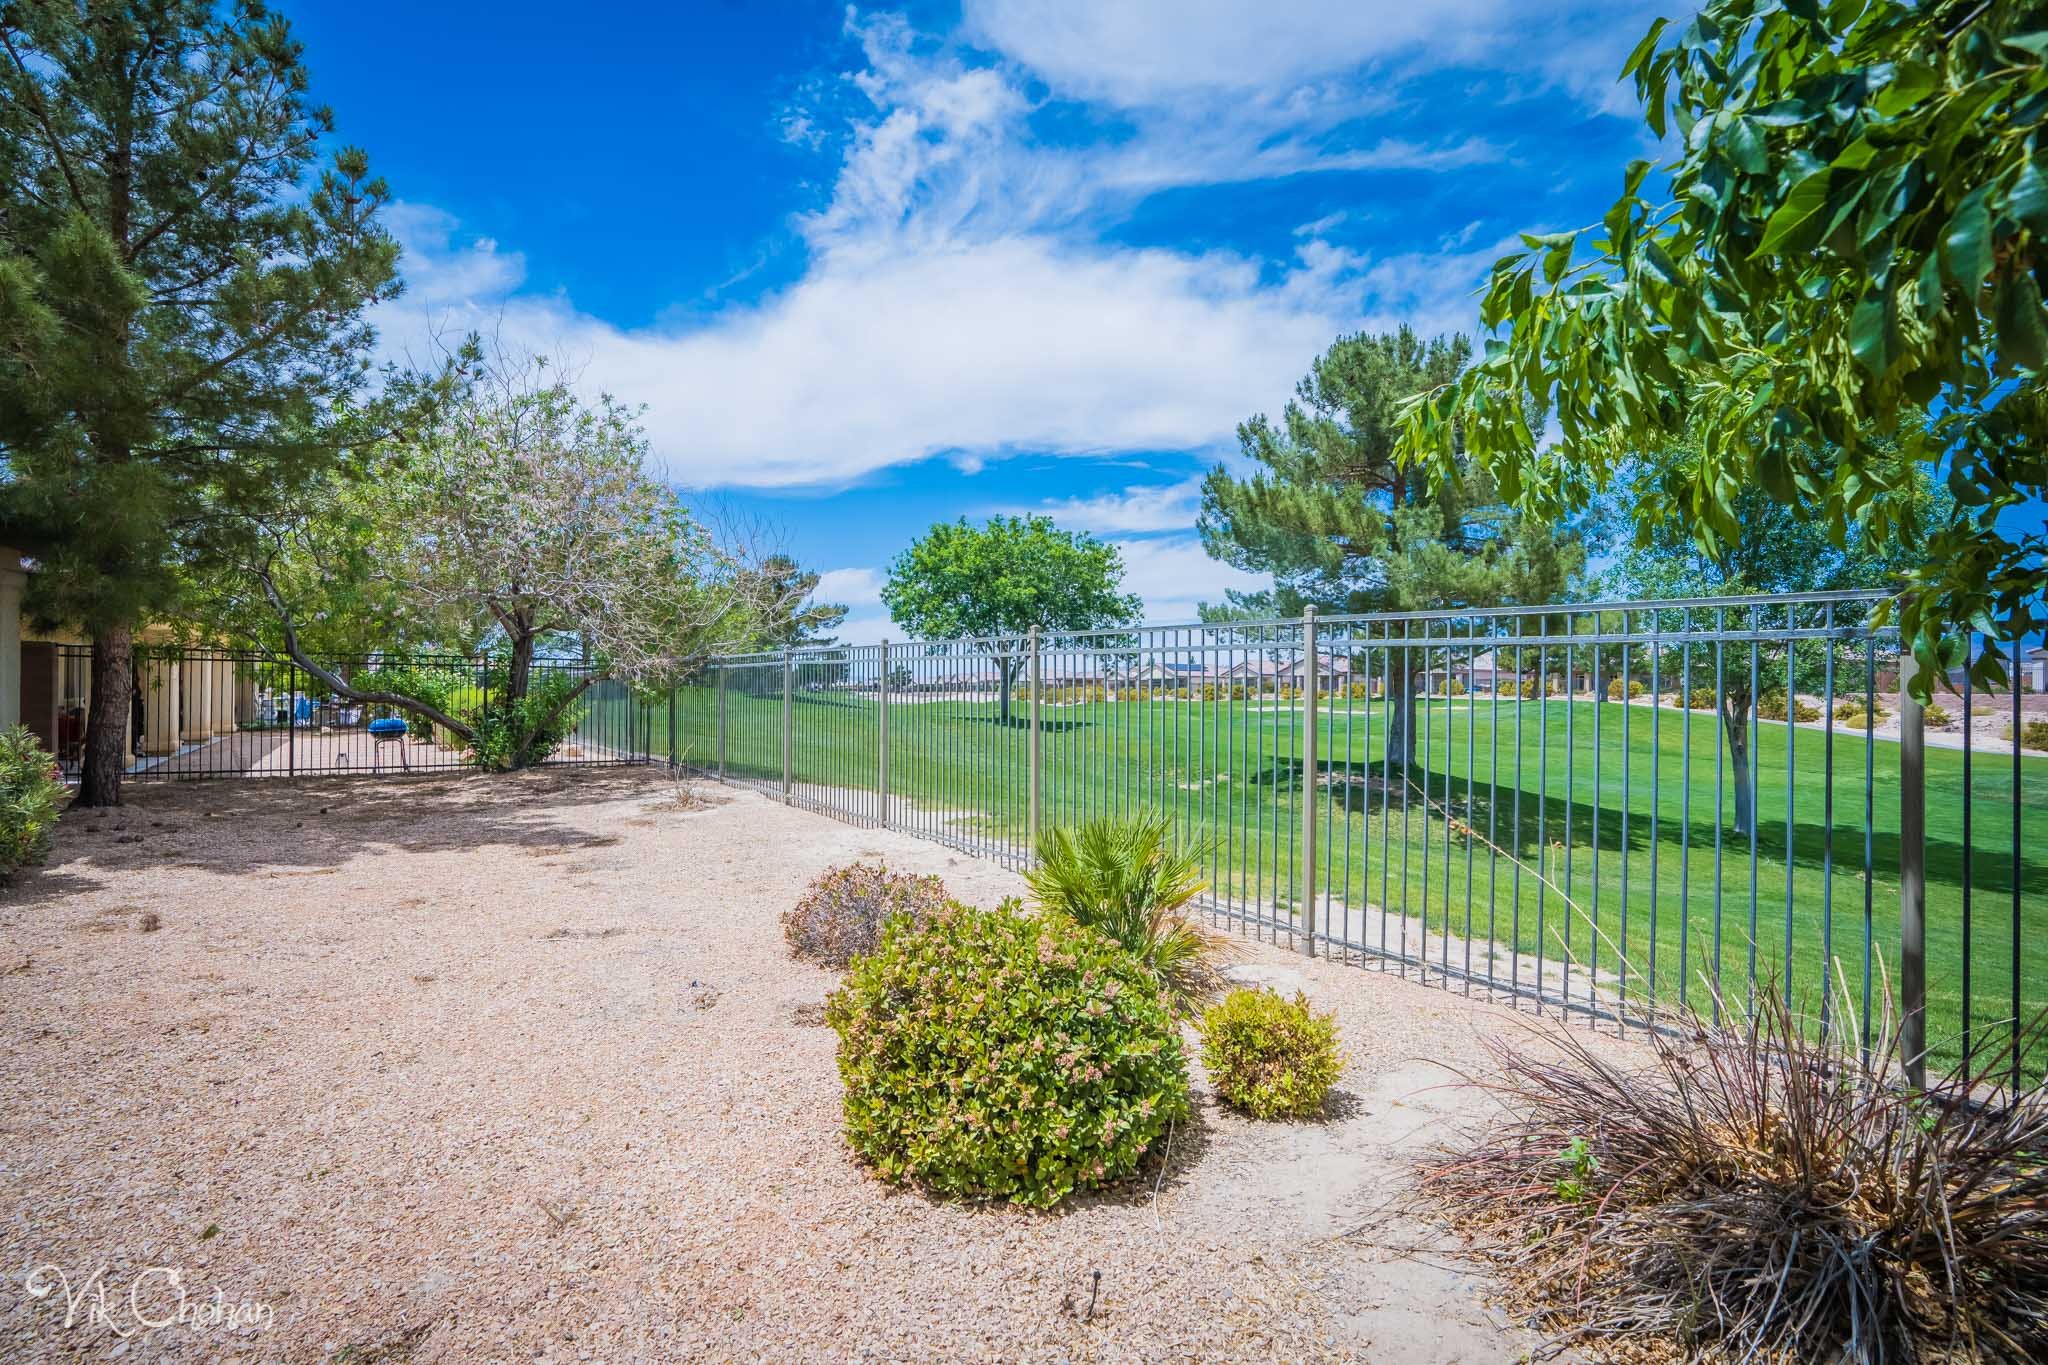 2022-05-15-5378-E-Cansano-St-Pahrump-Real-Estate-Photography-Virtual-Tour-Drone-Photography-Vik-Chohan-Photography-Photo-Booth-Social-Media-VCP-106.jpg